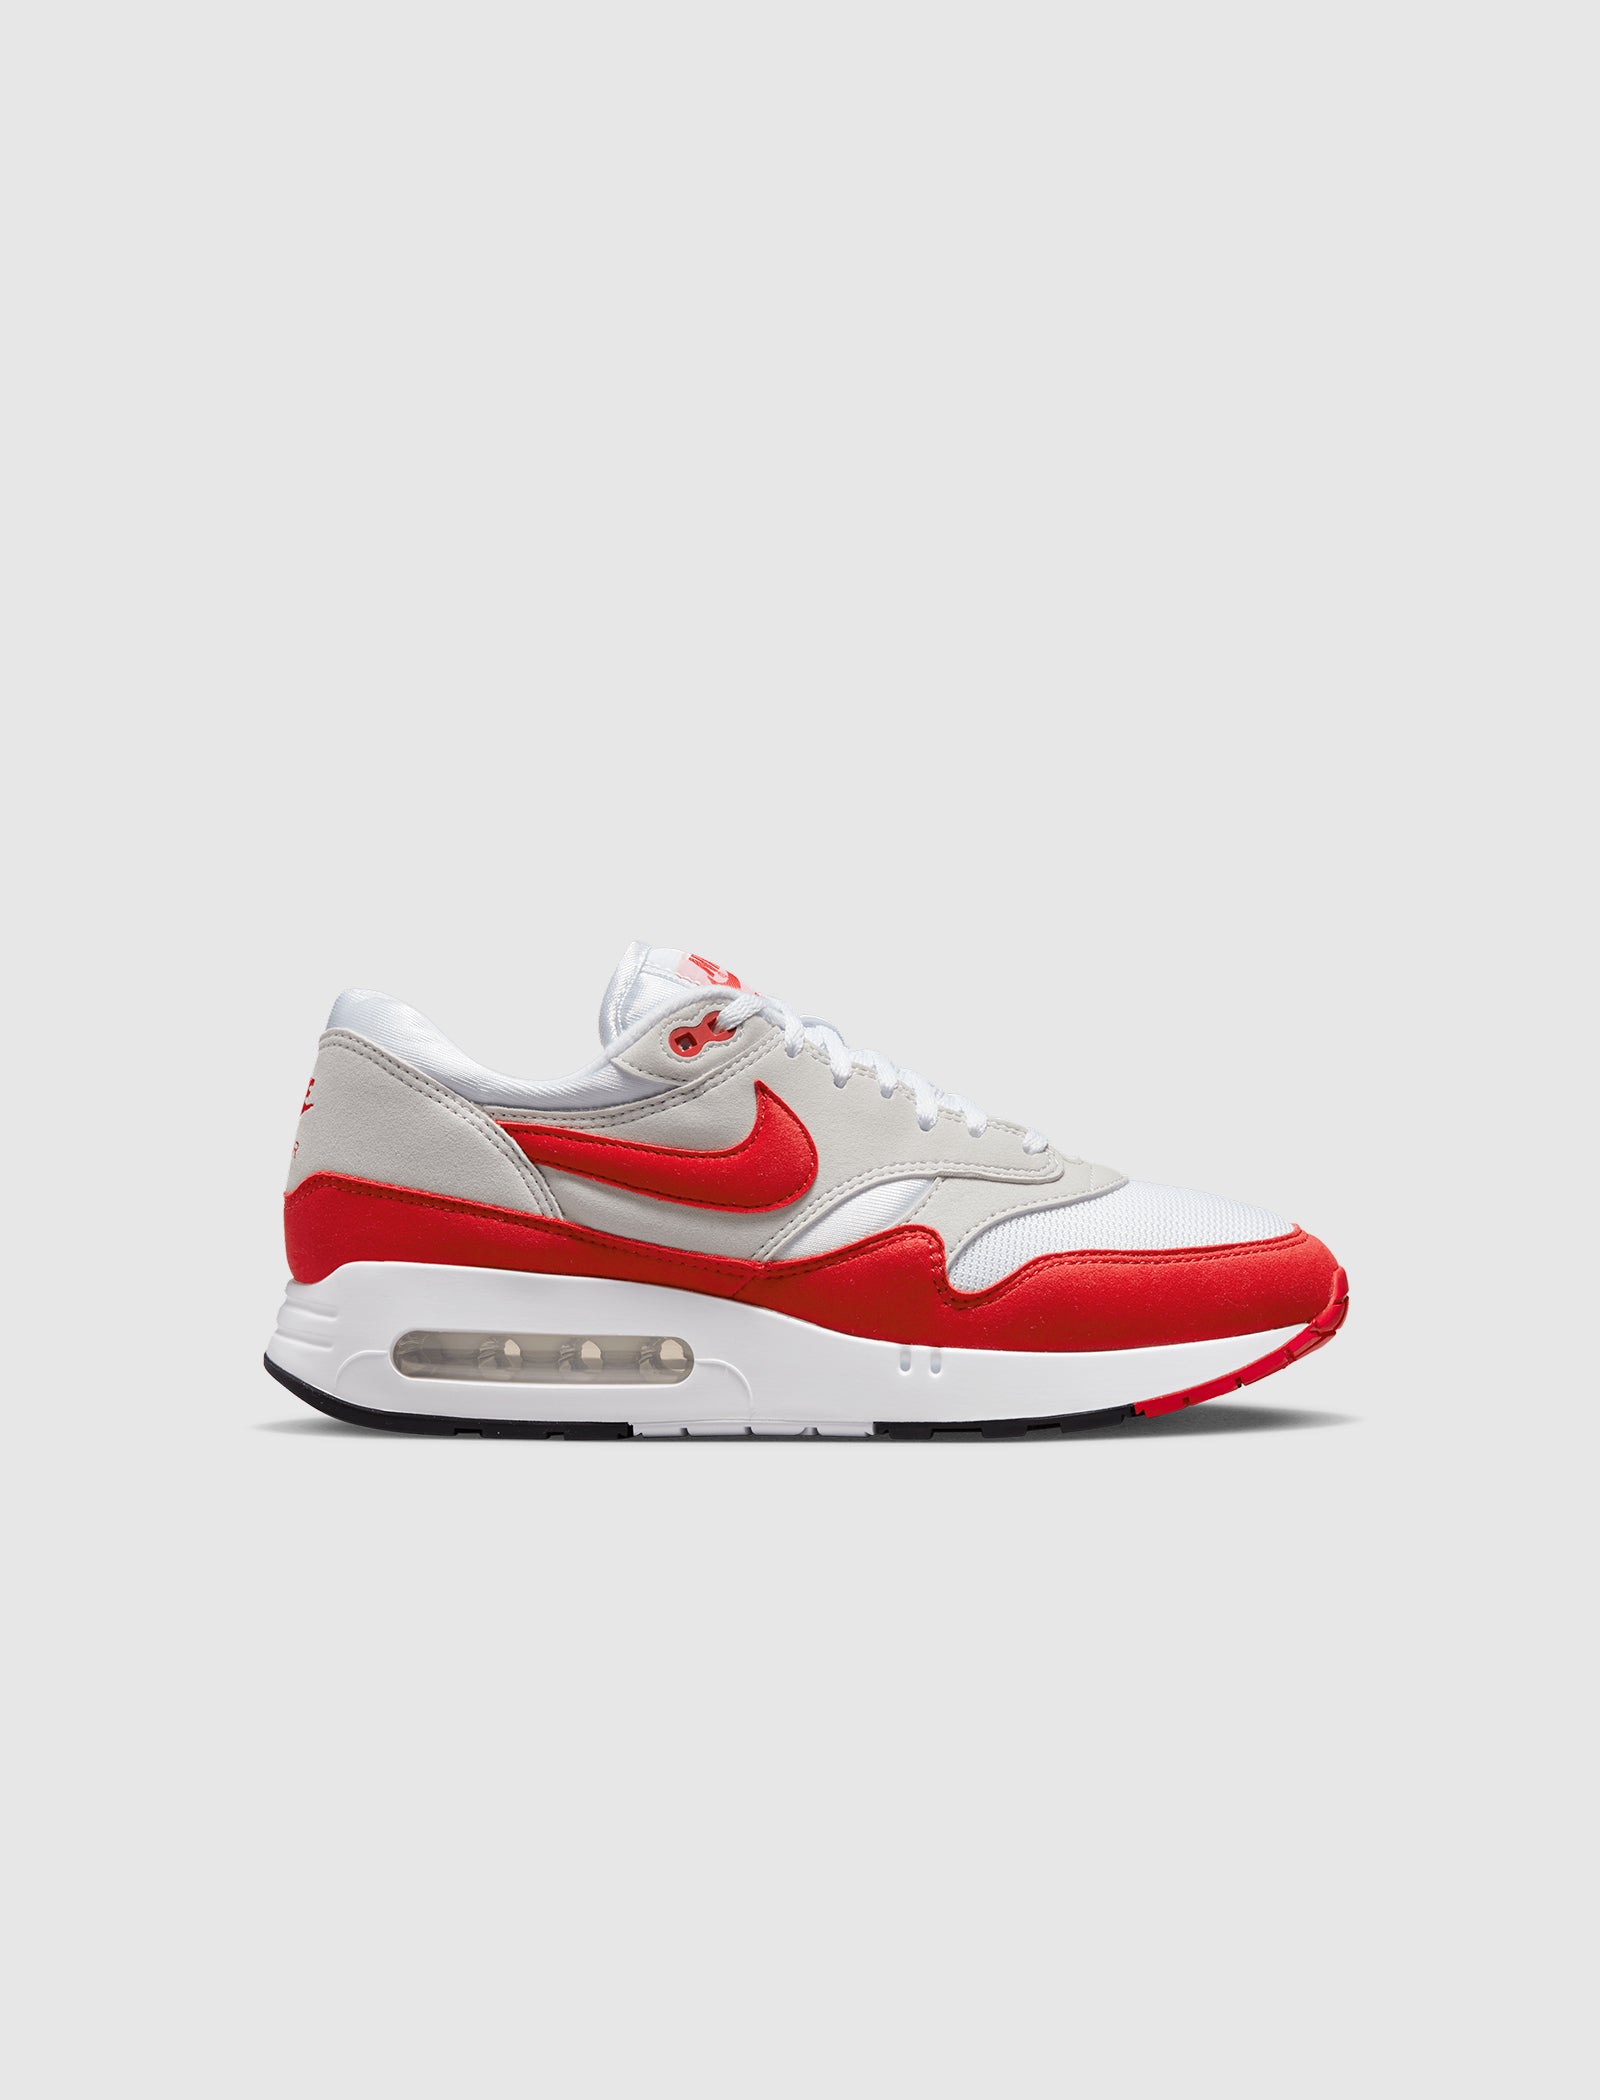 AIR MAX 1 "UNIVERSITY RED" – Store